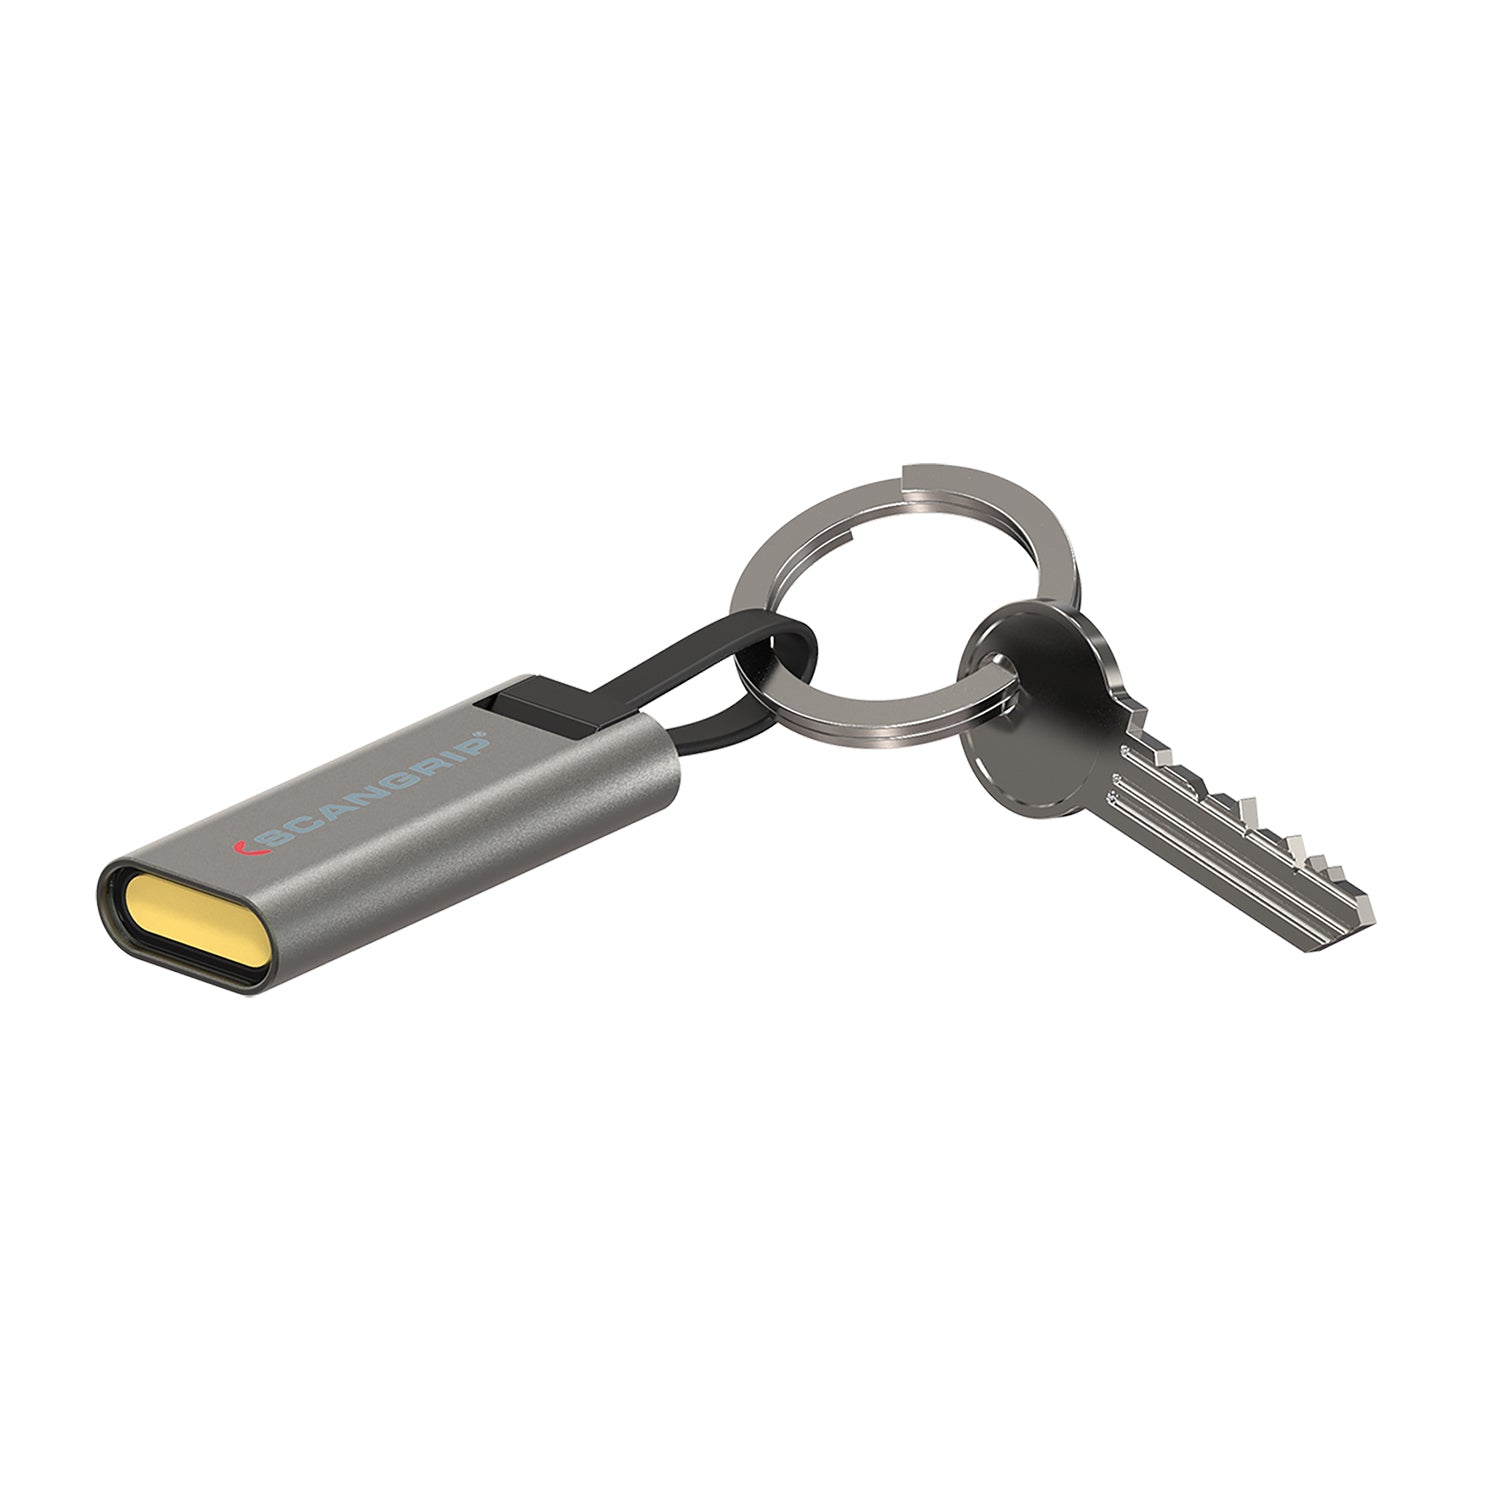 The new, 2024, Flash Micro R from Scangrip is a dimmable keychain flashlight with up to 75 lumen that re-charges with an integrated USB cable. Scangrip Ireland